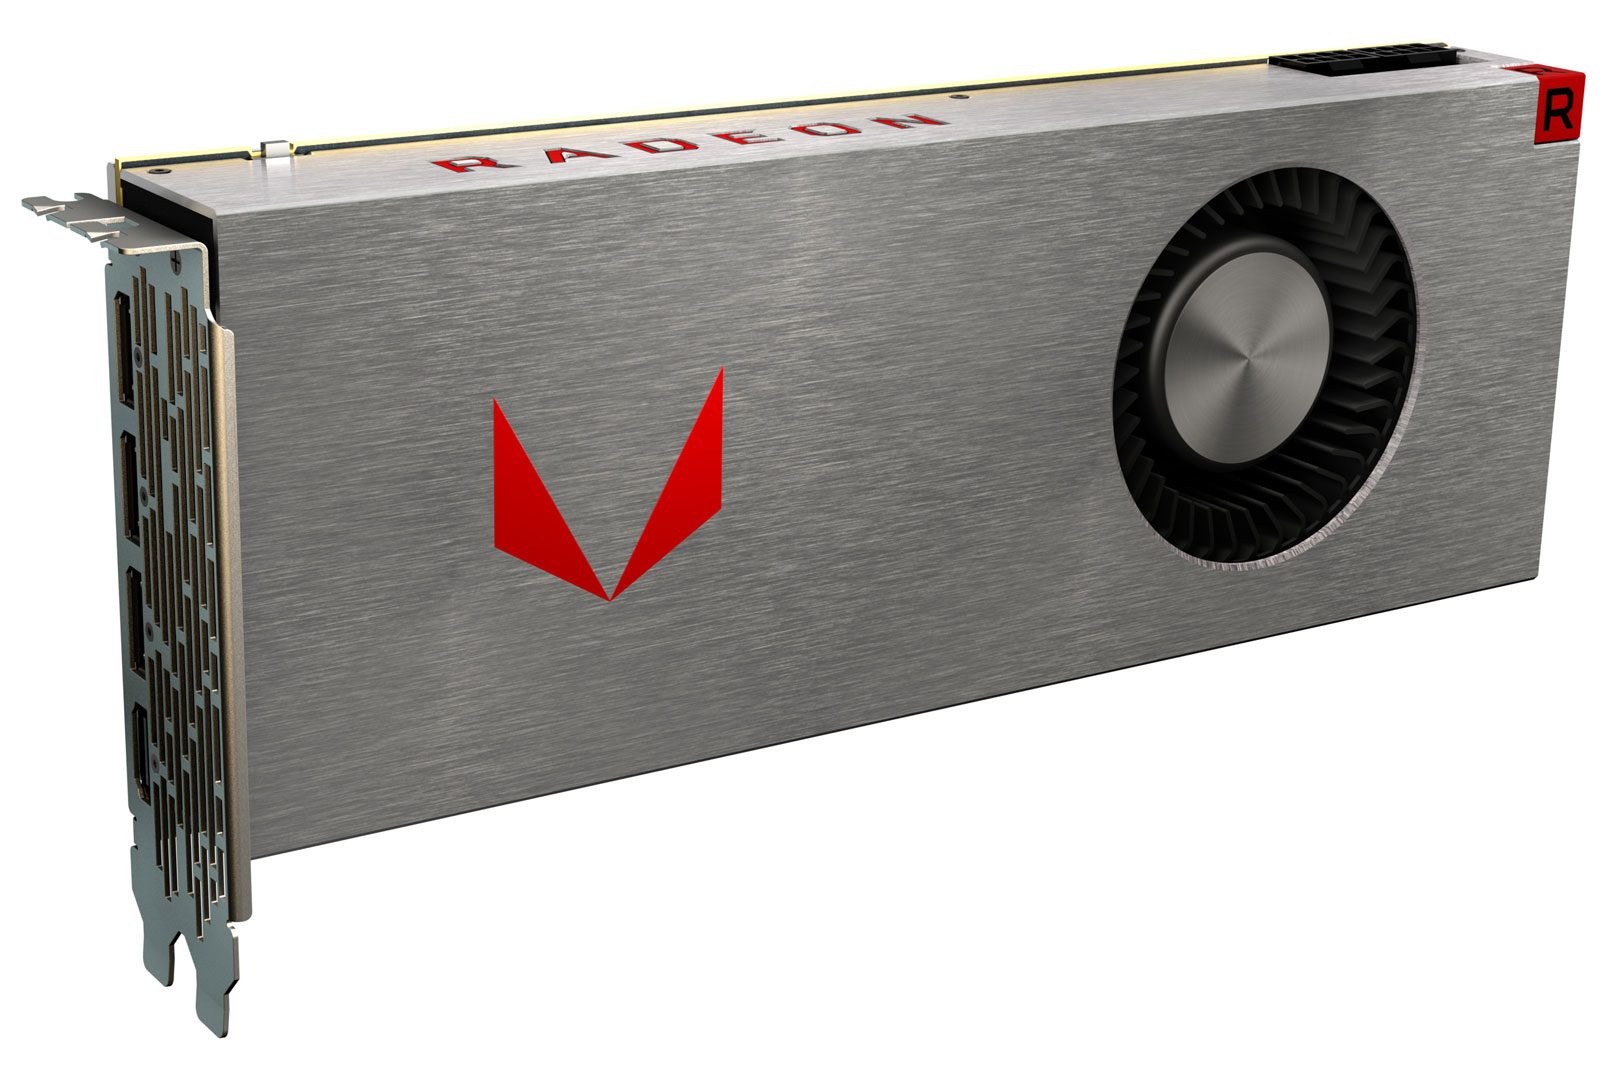 AMD Hits the High-End Gaming with Radeon RX Vega